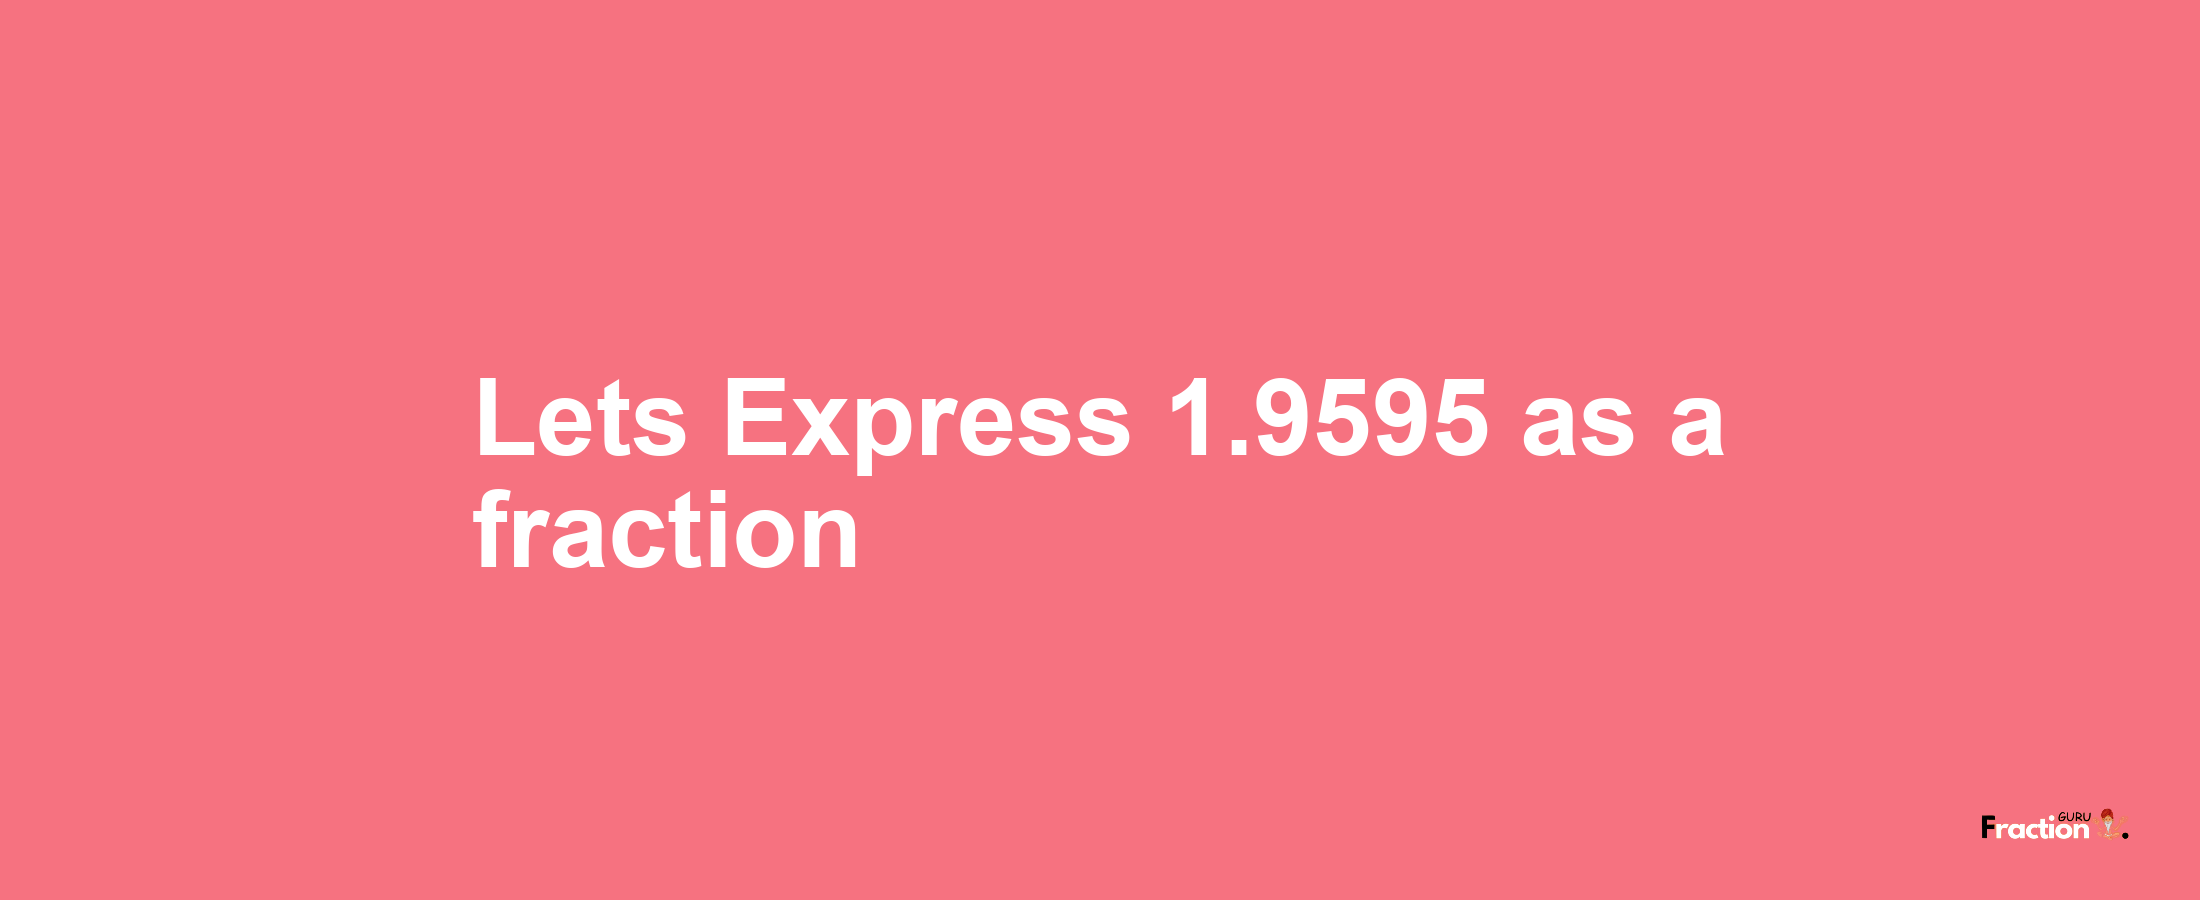 Lets Express 1.9595 as afraction